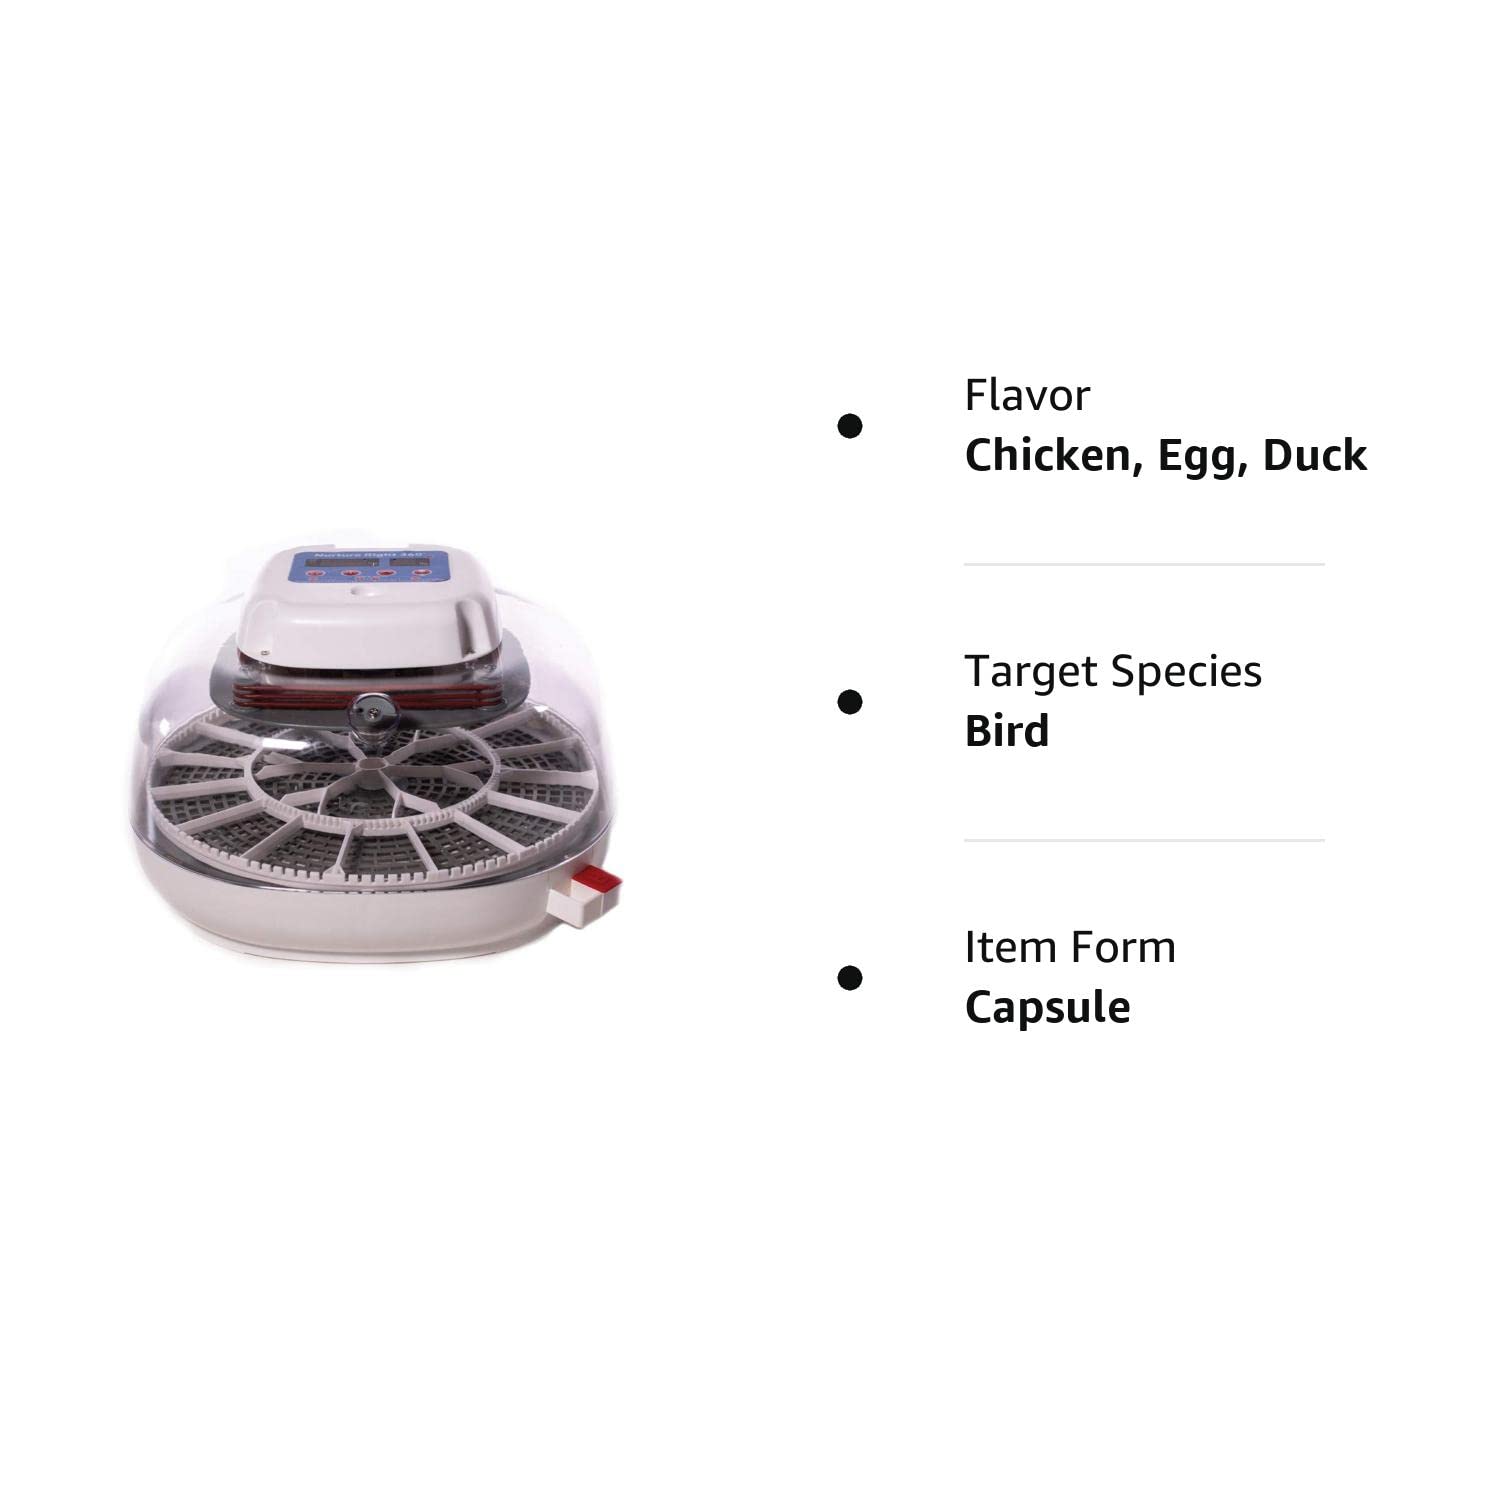 Manna Pro Harris Farms Nurture Right Egg Incubator for Hatching Chicks Holds 22 Eggs Automatic Egg Turner